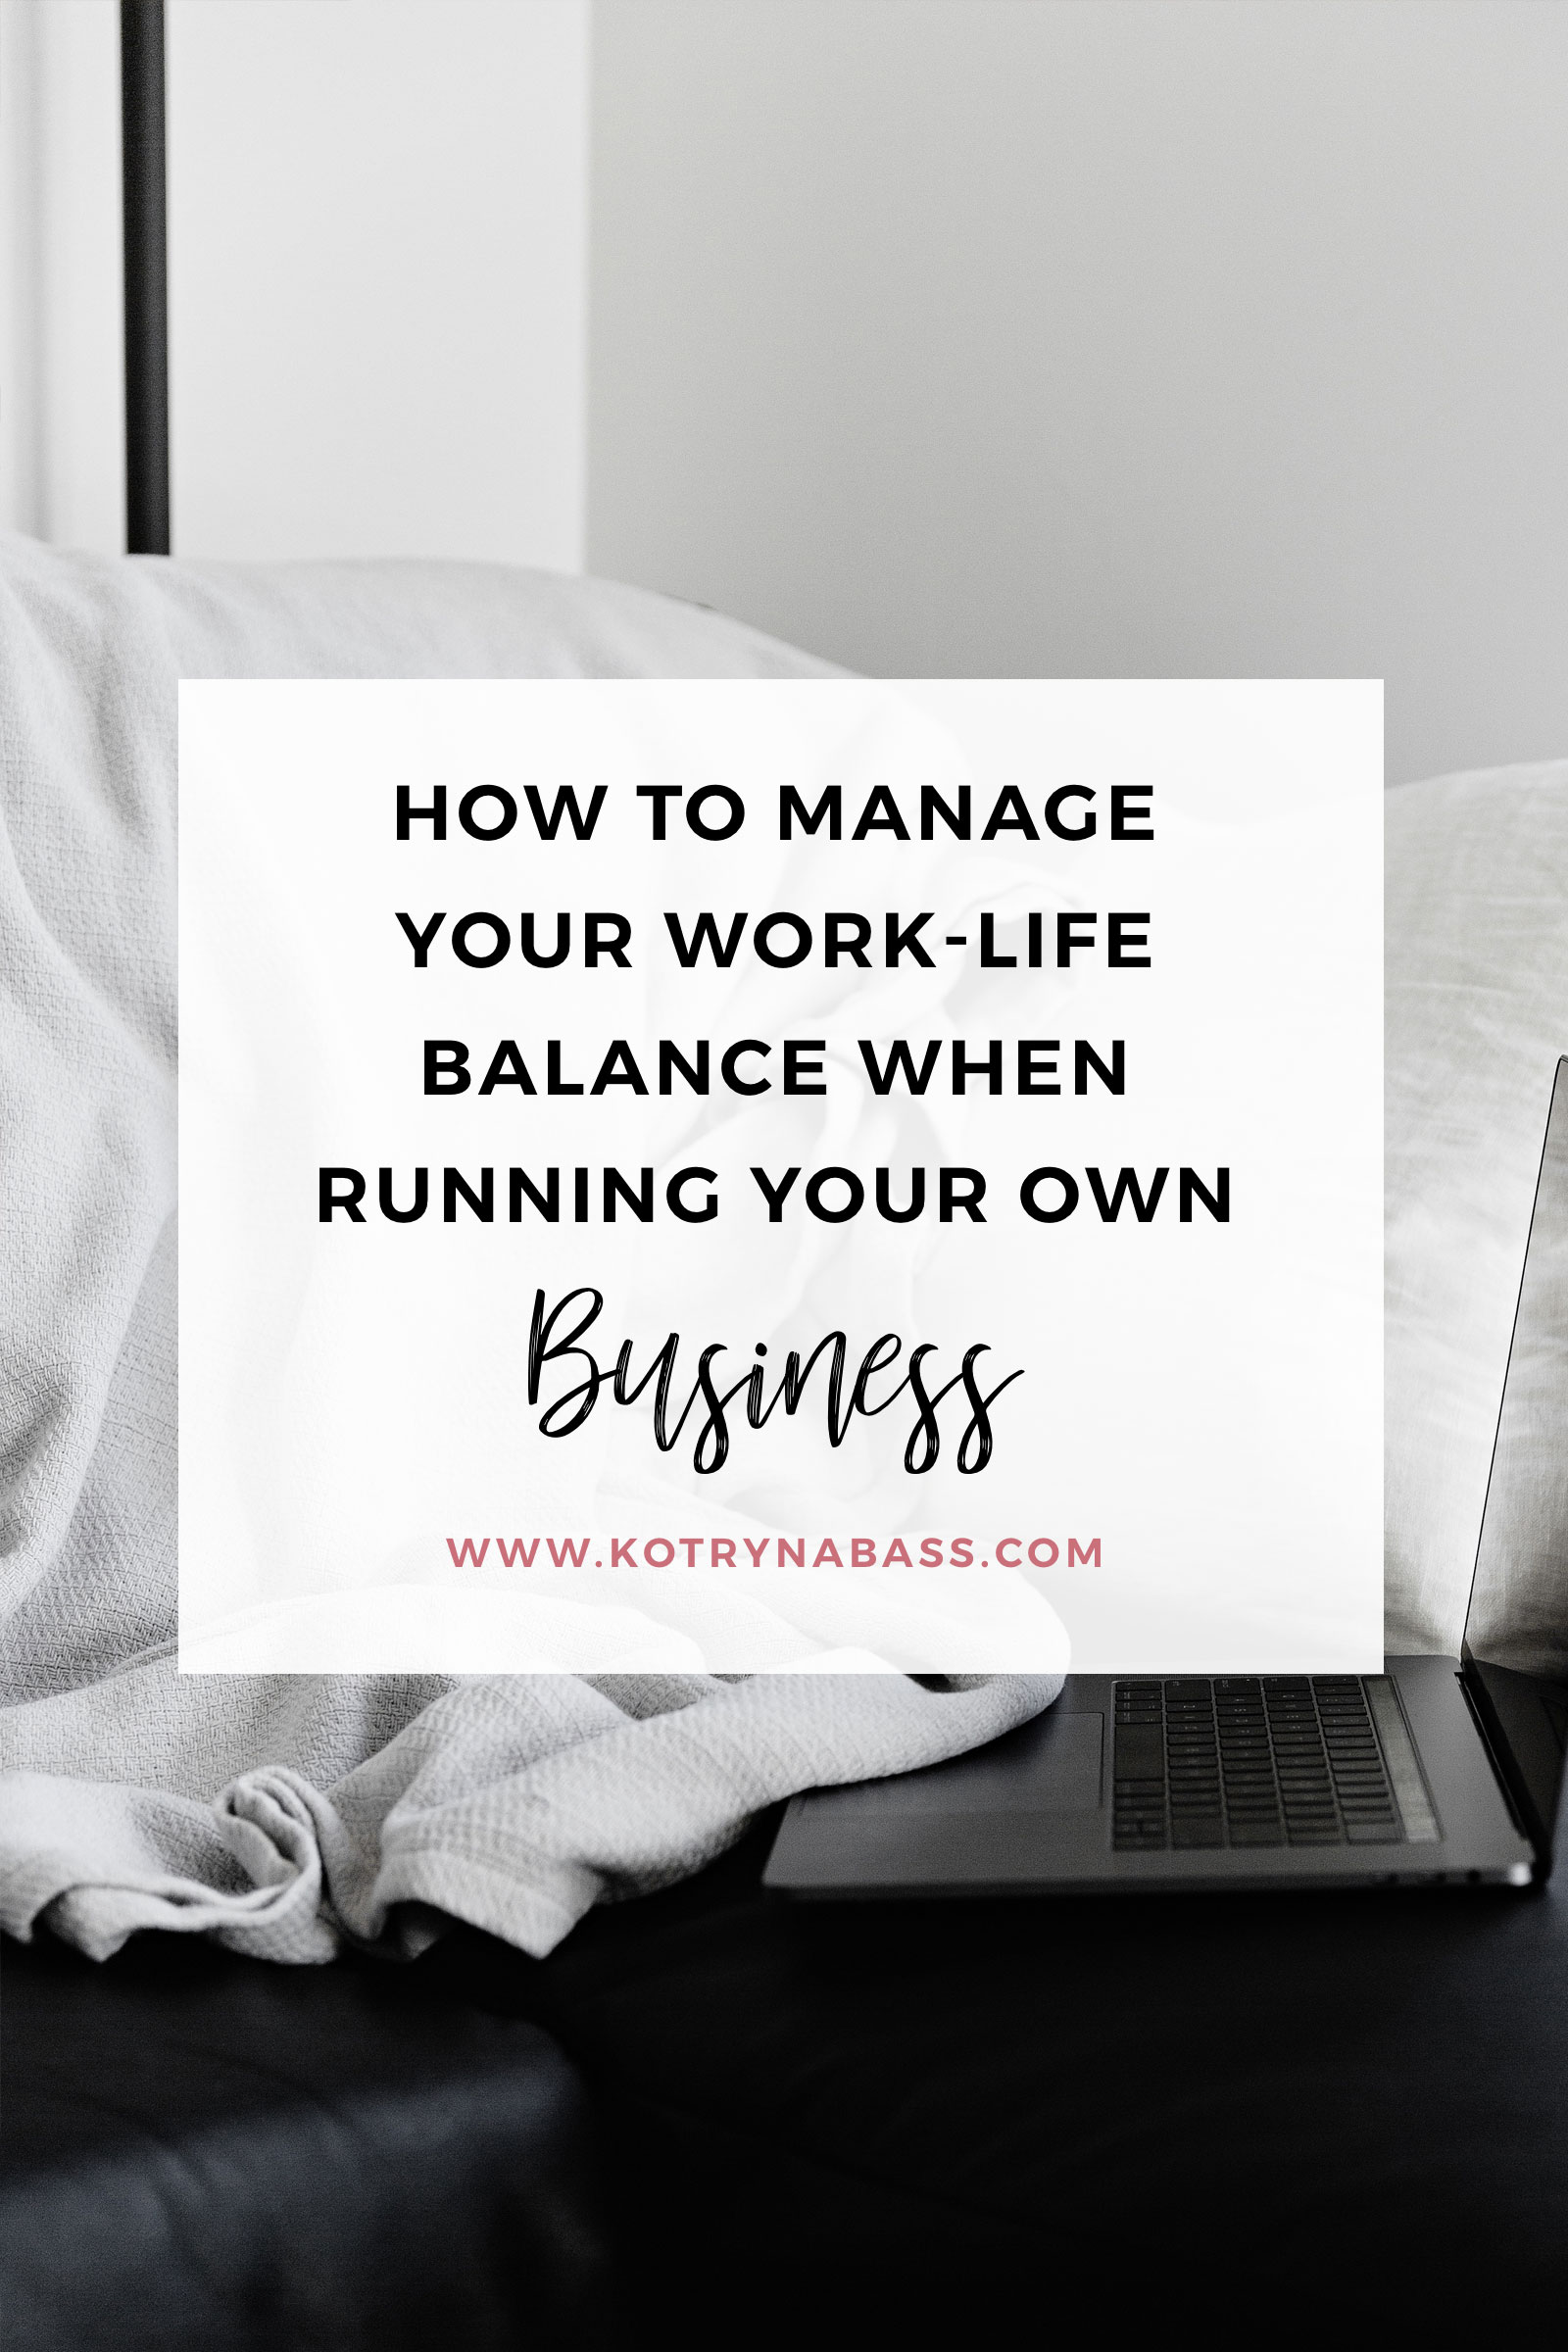 In life, I feel like I've won and lost at the same time. You see, it just so happens that I created a job for myself that I absolutely adore. This makes finding that work/life balance a bit more challenging on me & if you're running your own business, you will understand...